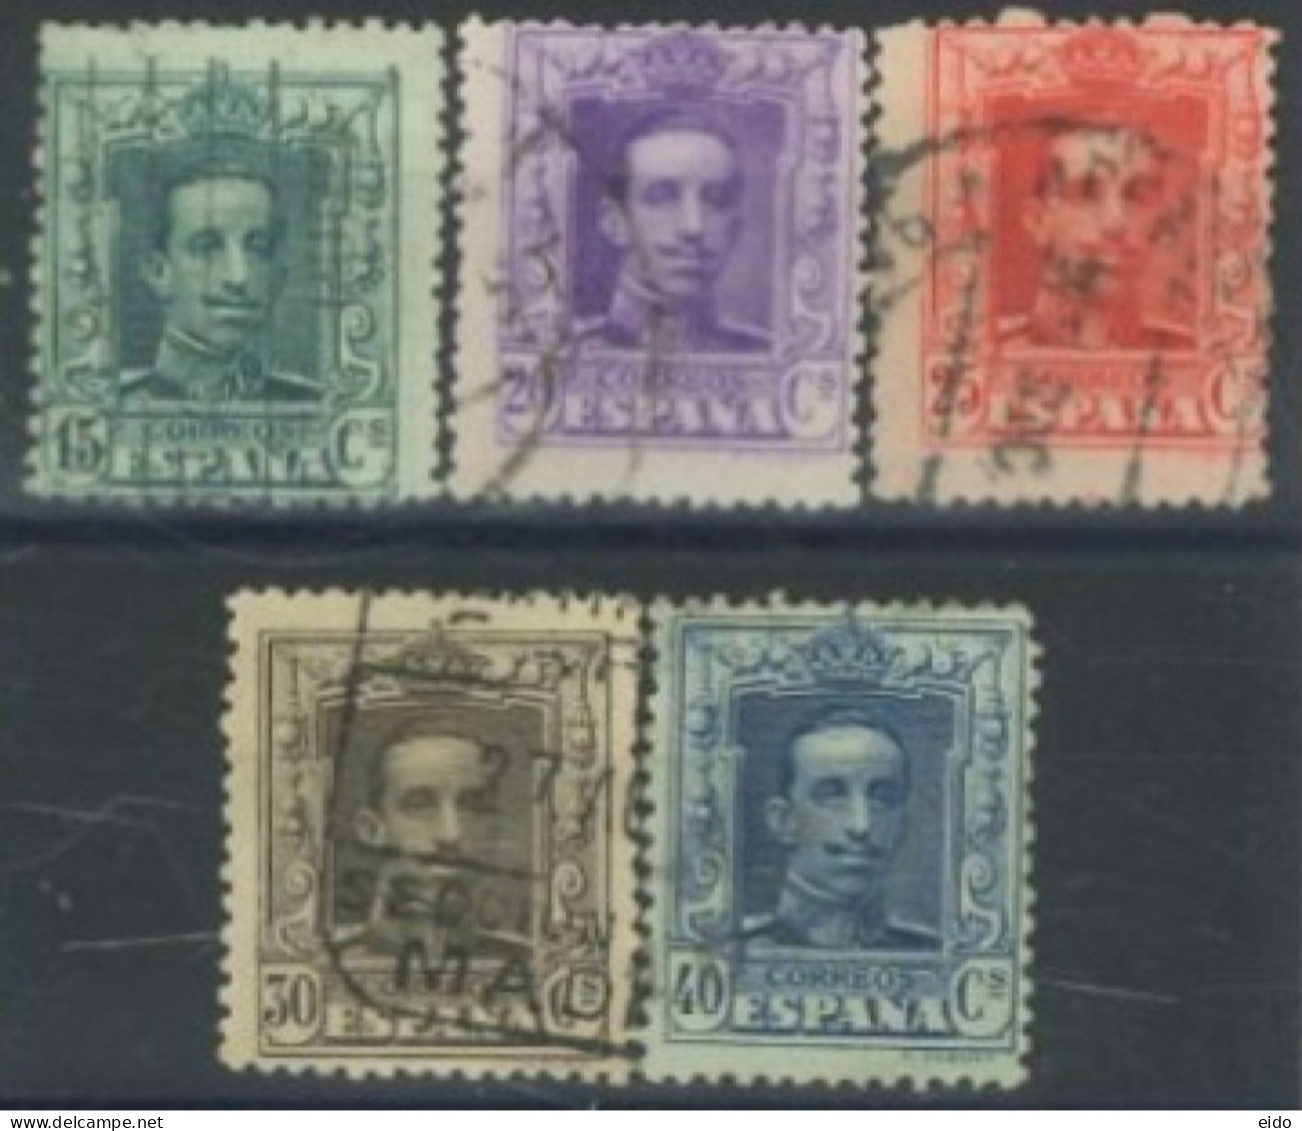 SPAIN, 1922/26, KING ALFONSO XIII STAMPS SET OF 5 # 336/40, USED. - Oblitérés